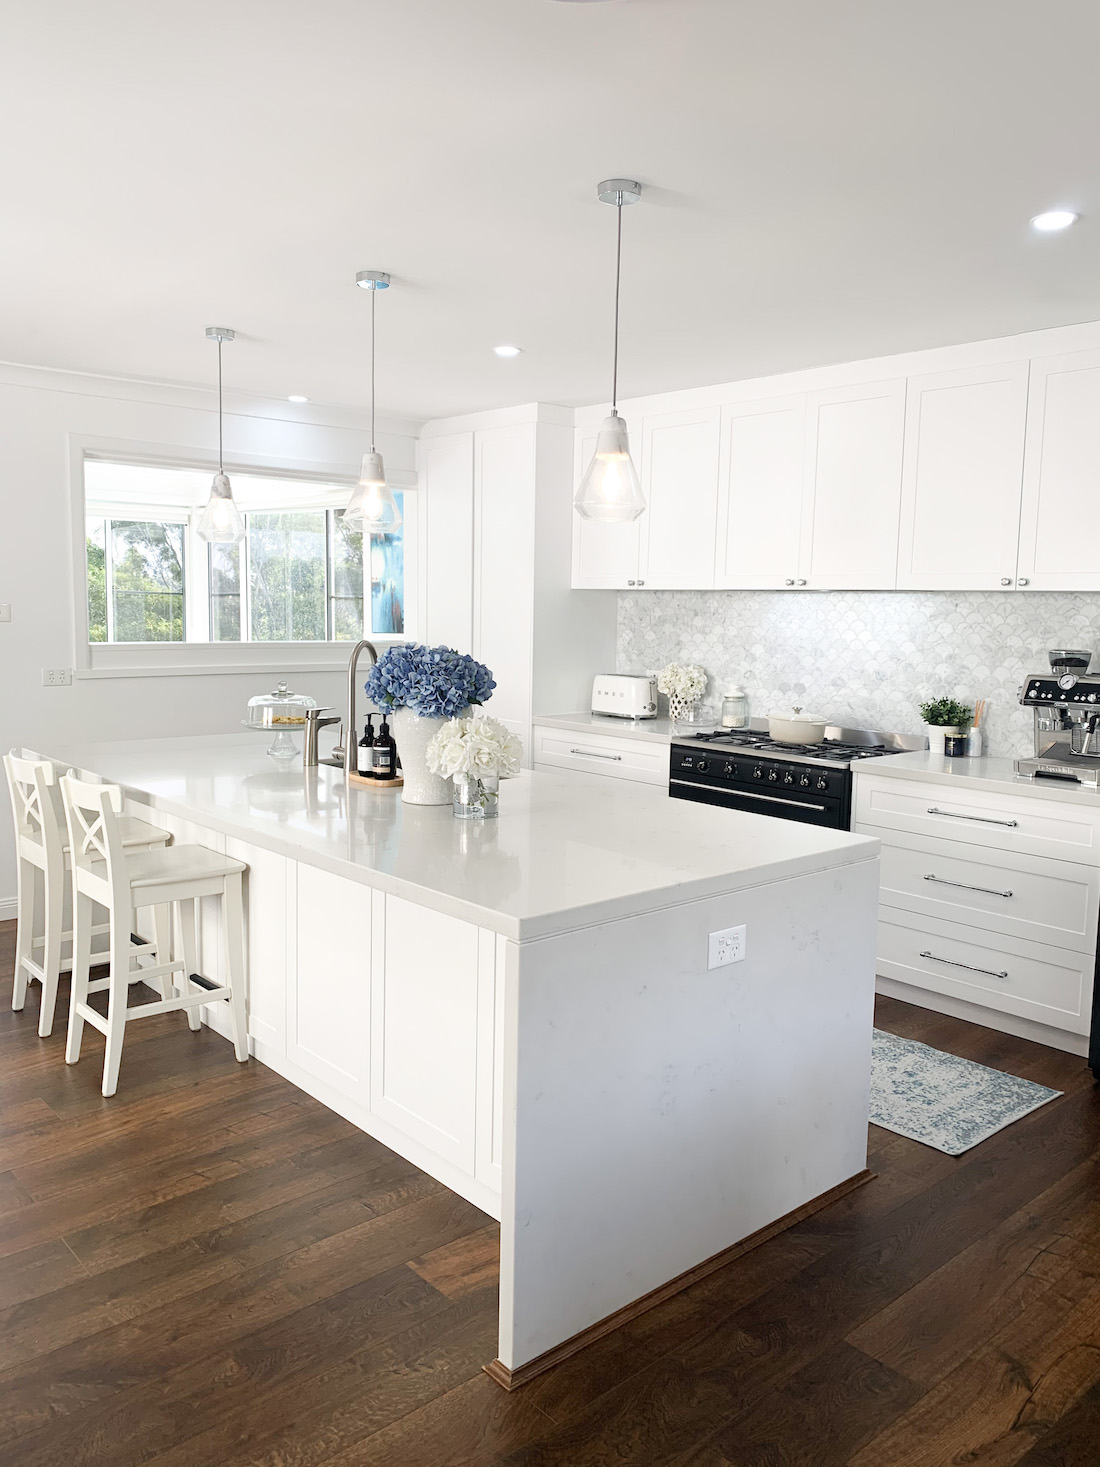 Hamptons inspired kitchen makeover _ White kitchen after transformation